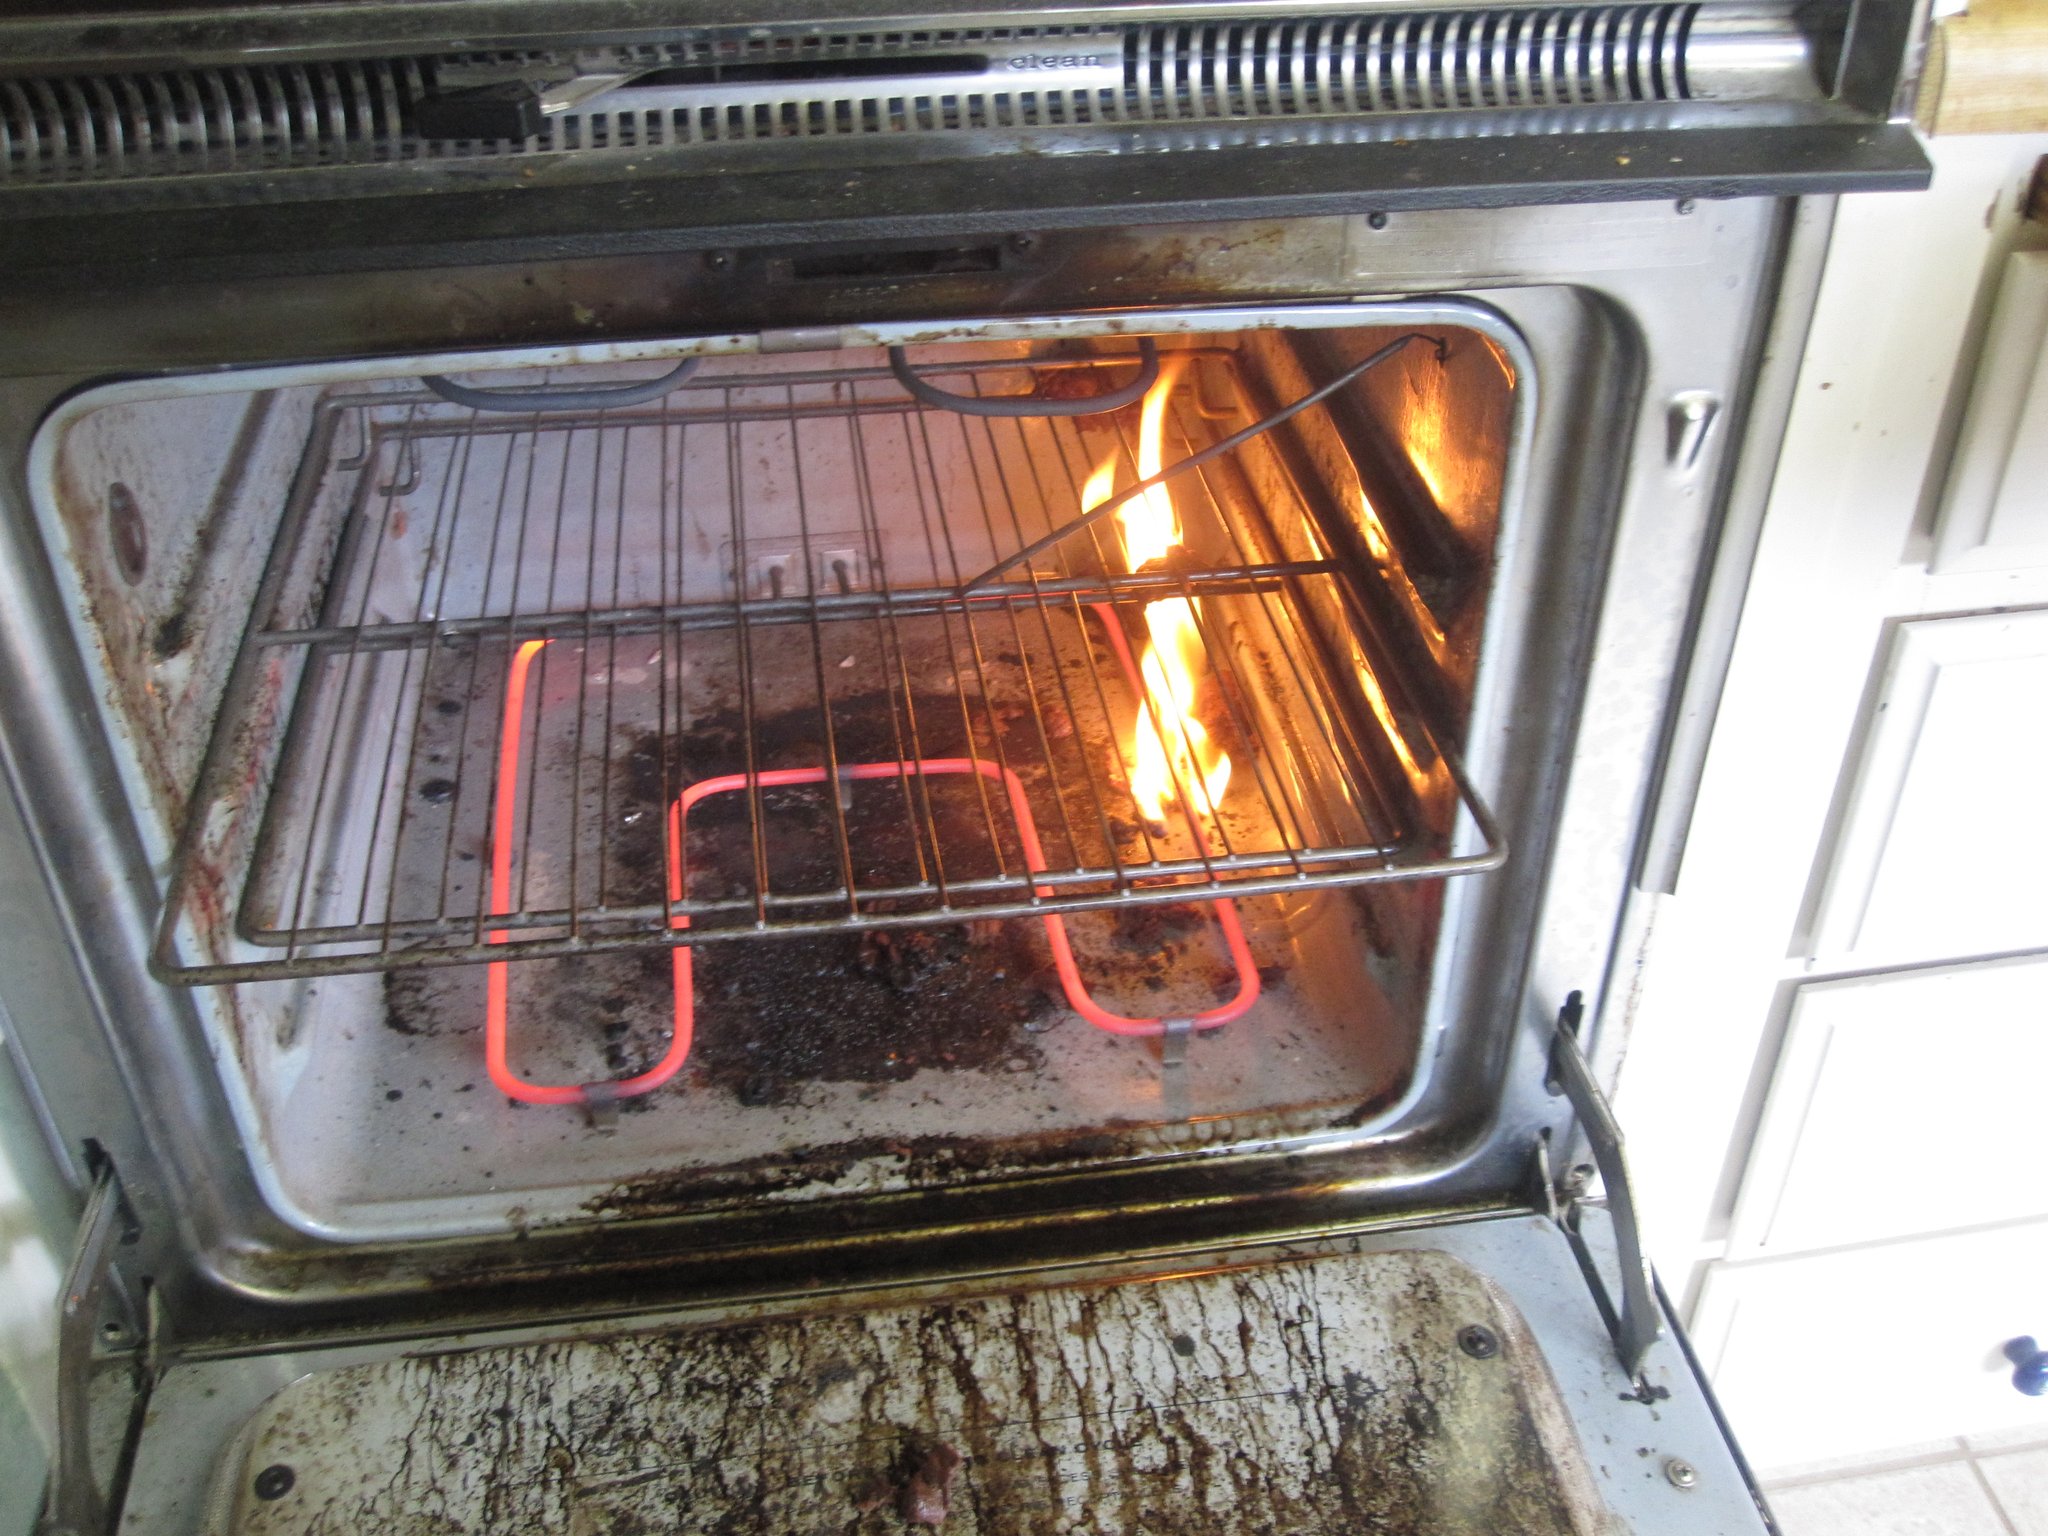 Fire in oven photo